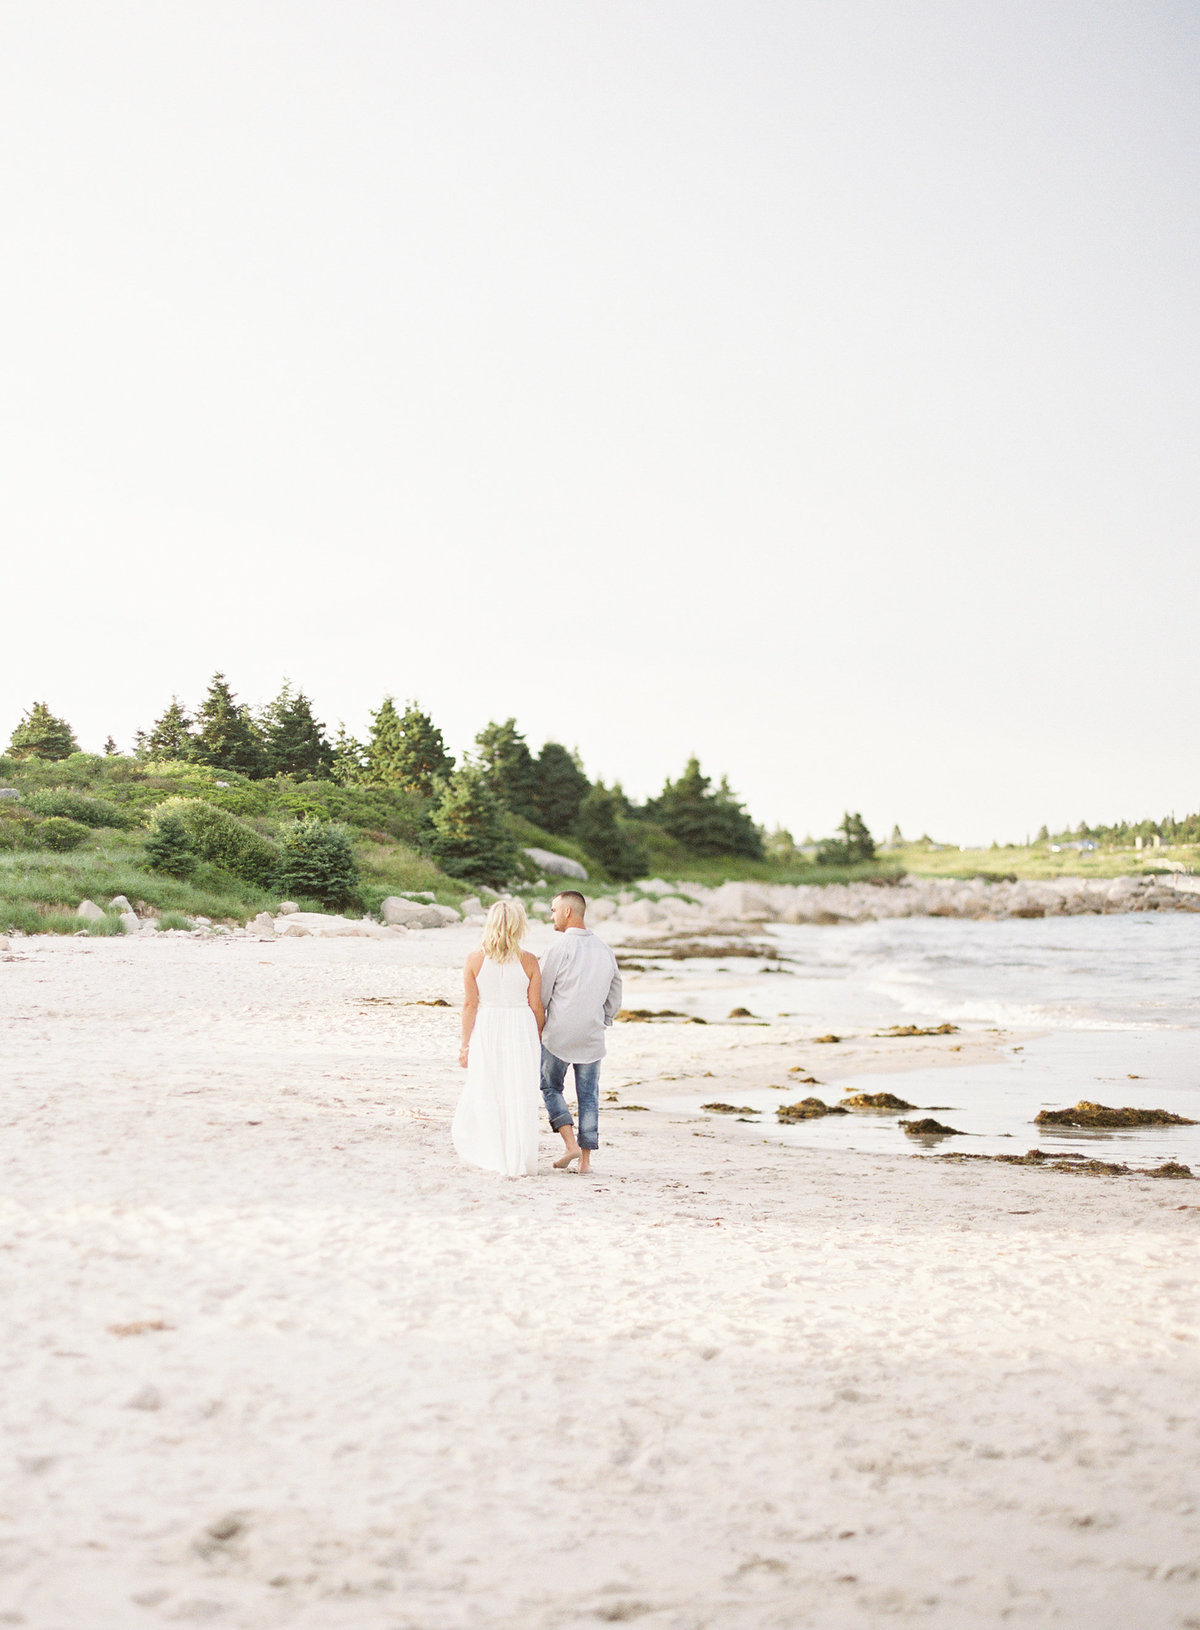 Jacqueline Anne Photography  - Hailey and Shea - Crystal Crescent Beach Engagement-70